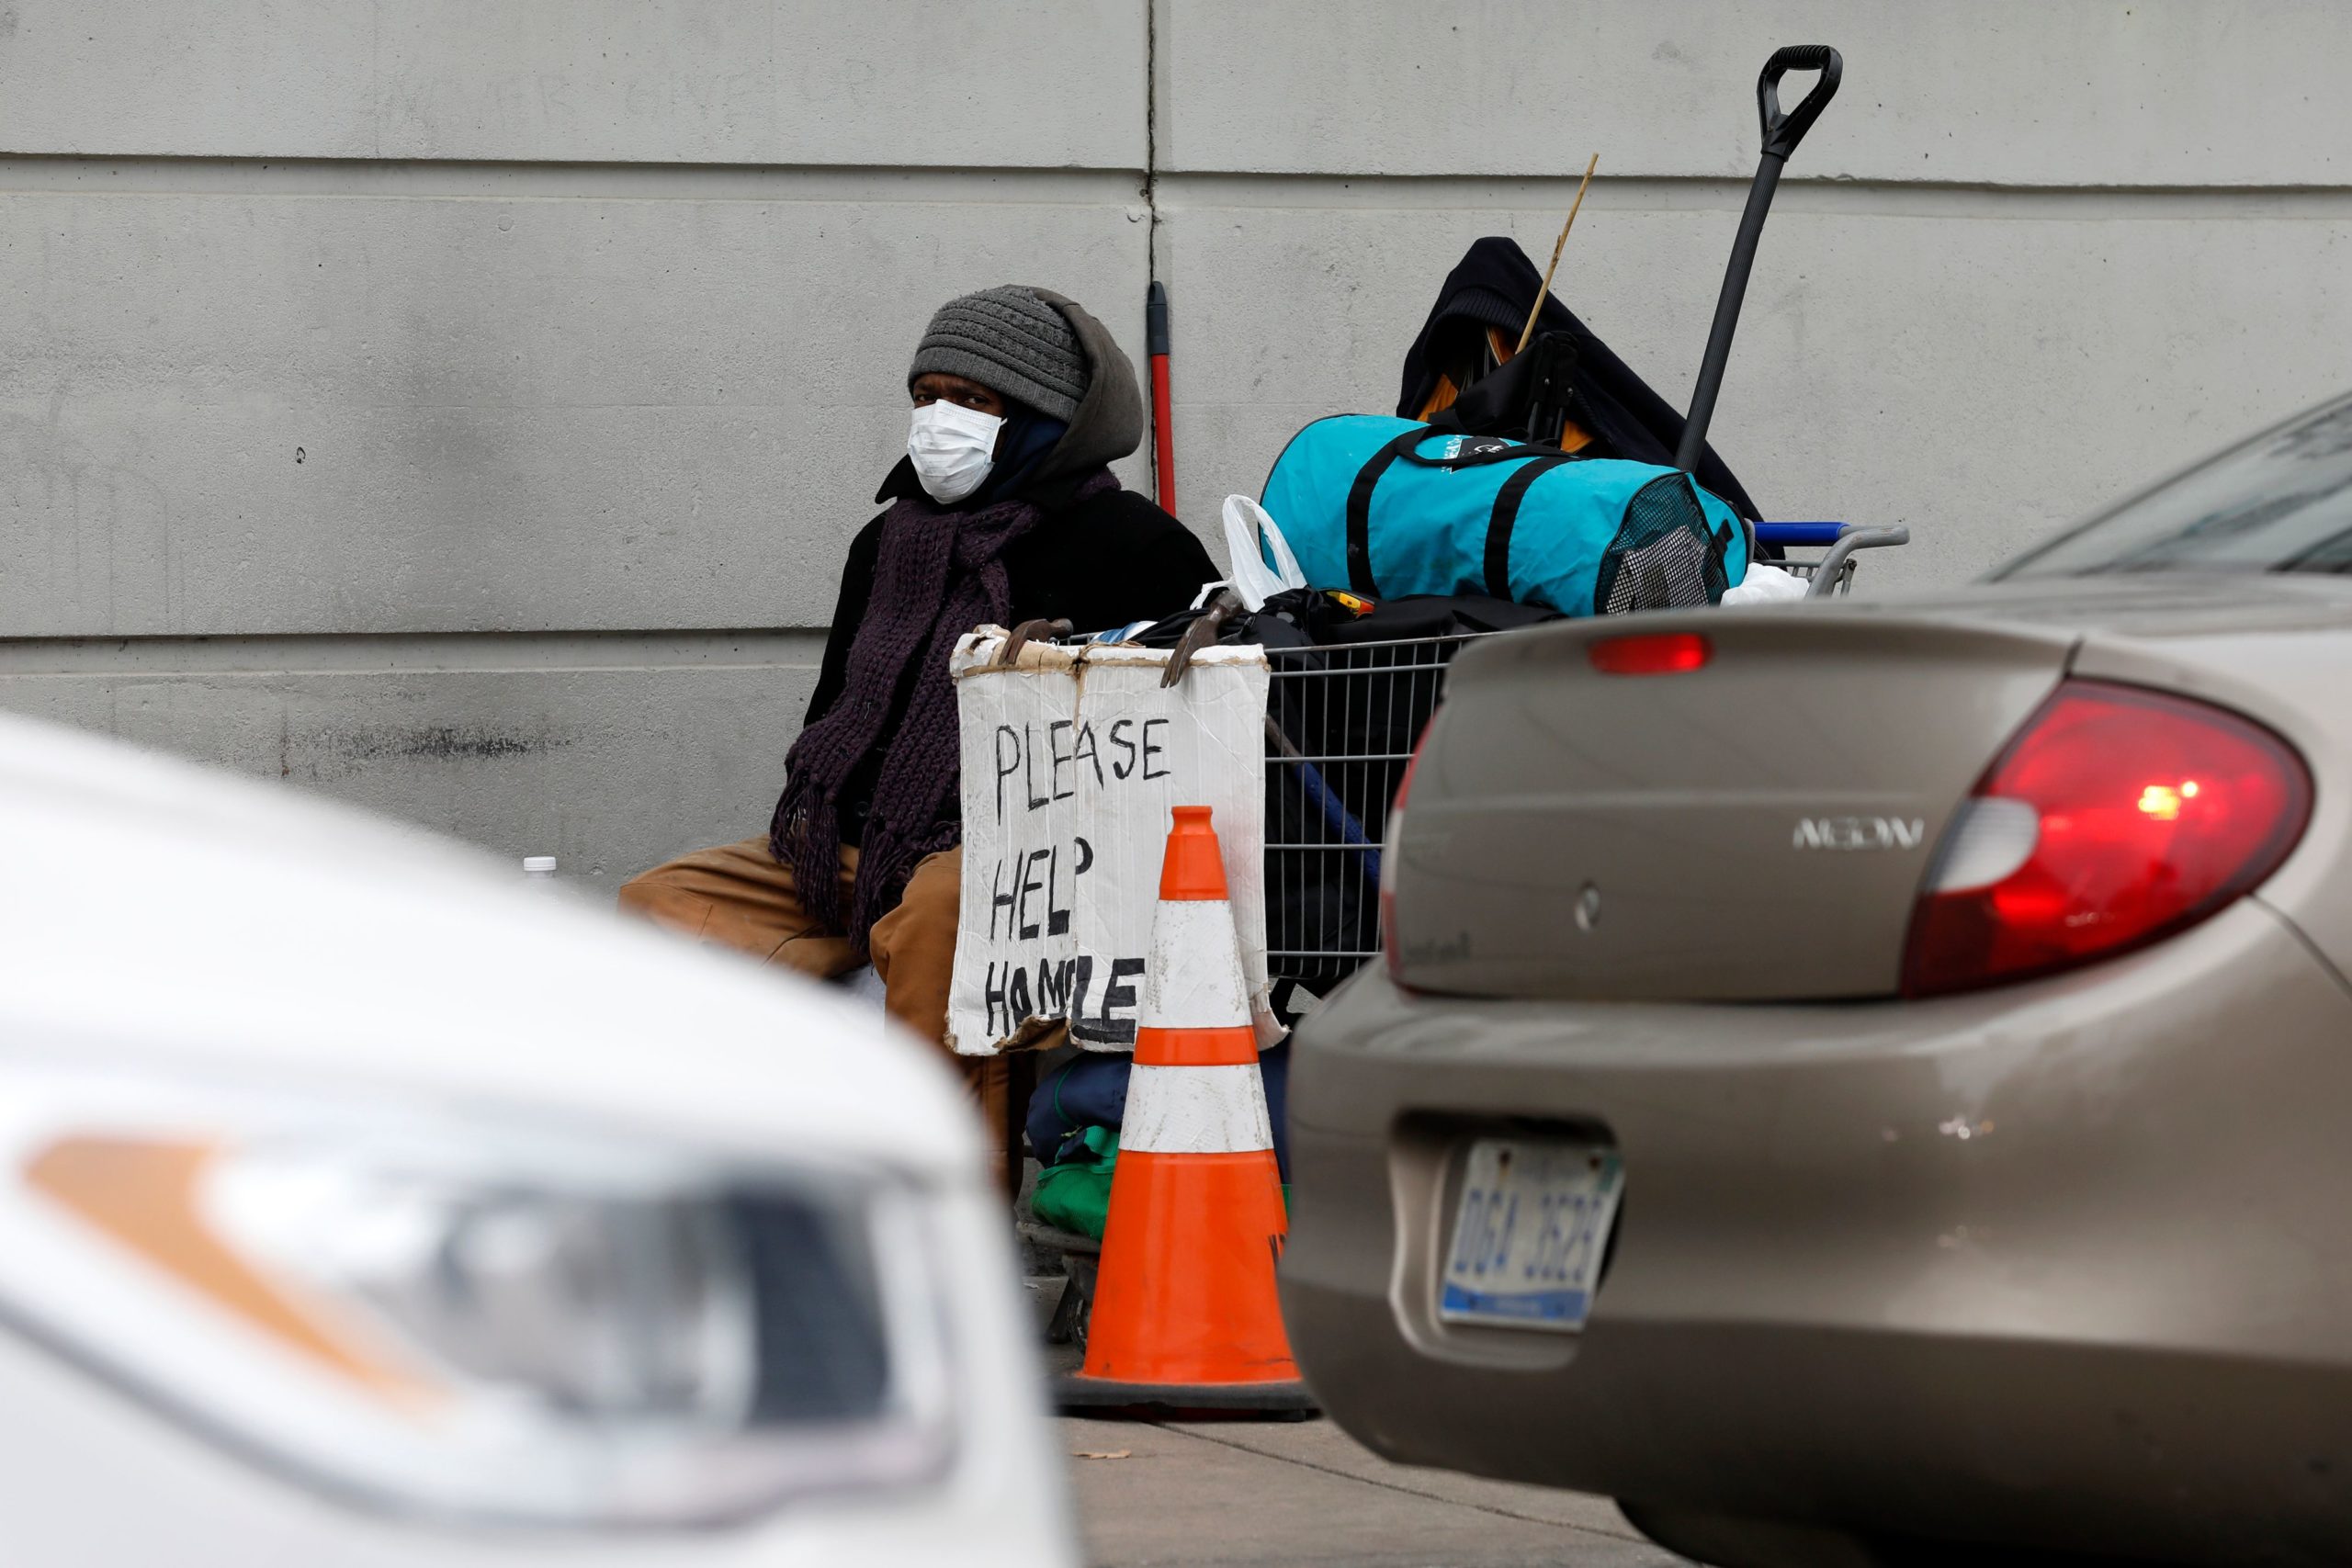 A homeless person wearing a protective mask is pictured in Highland Park, Michigan on March 30. (Jeff Kowalsky/AFP via Getty Images)